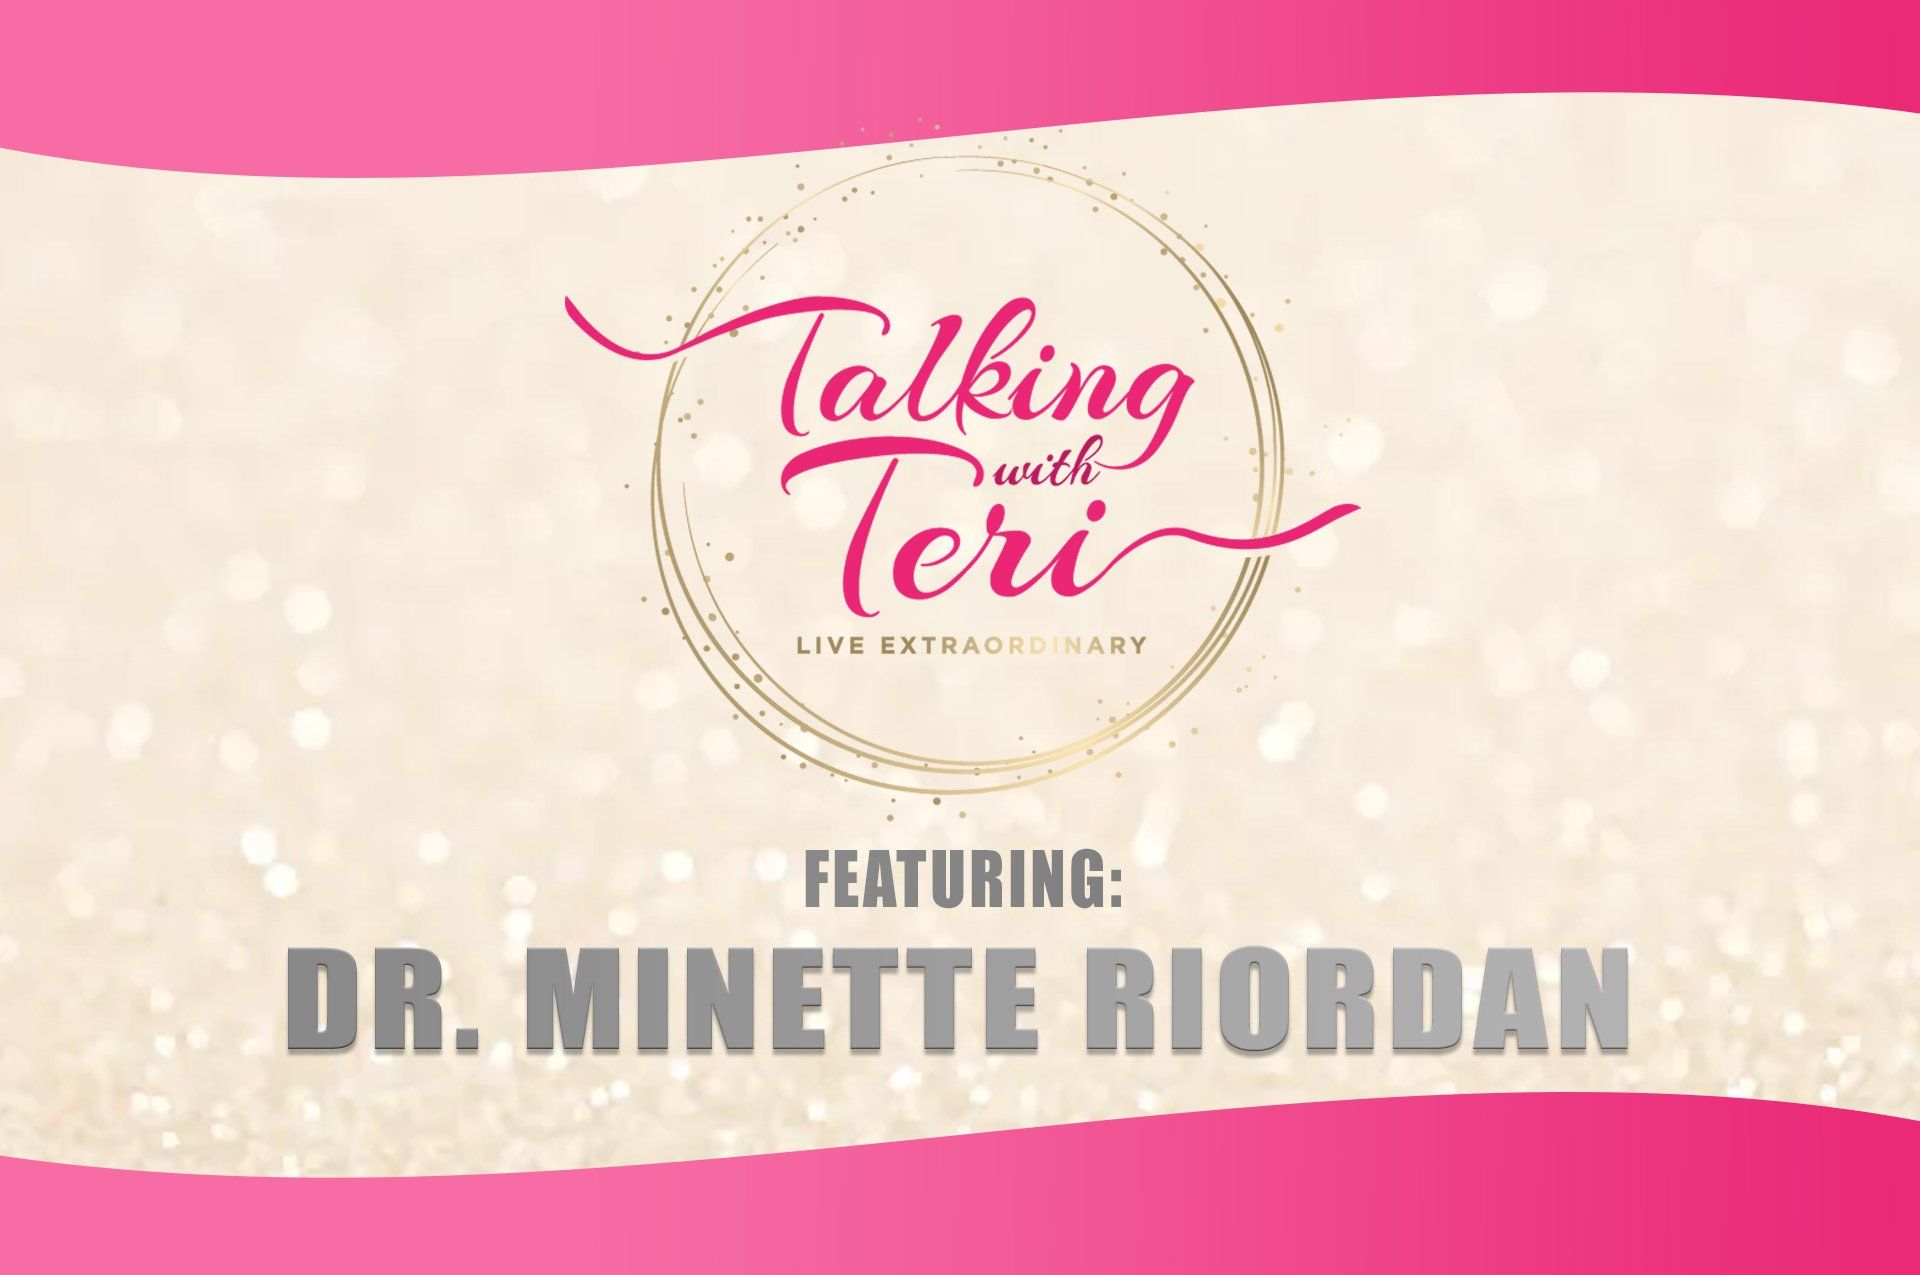 Talking With Teri and Dr. Minette Riordan